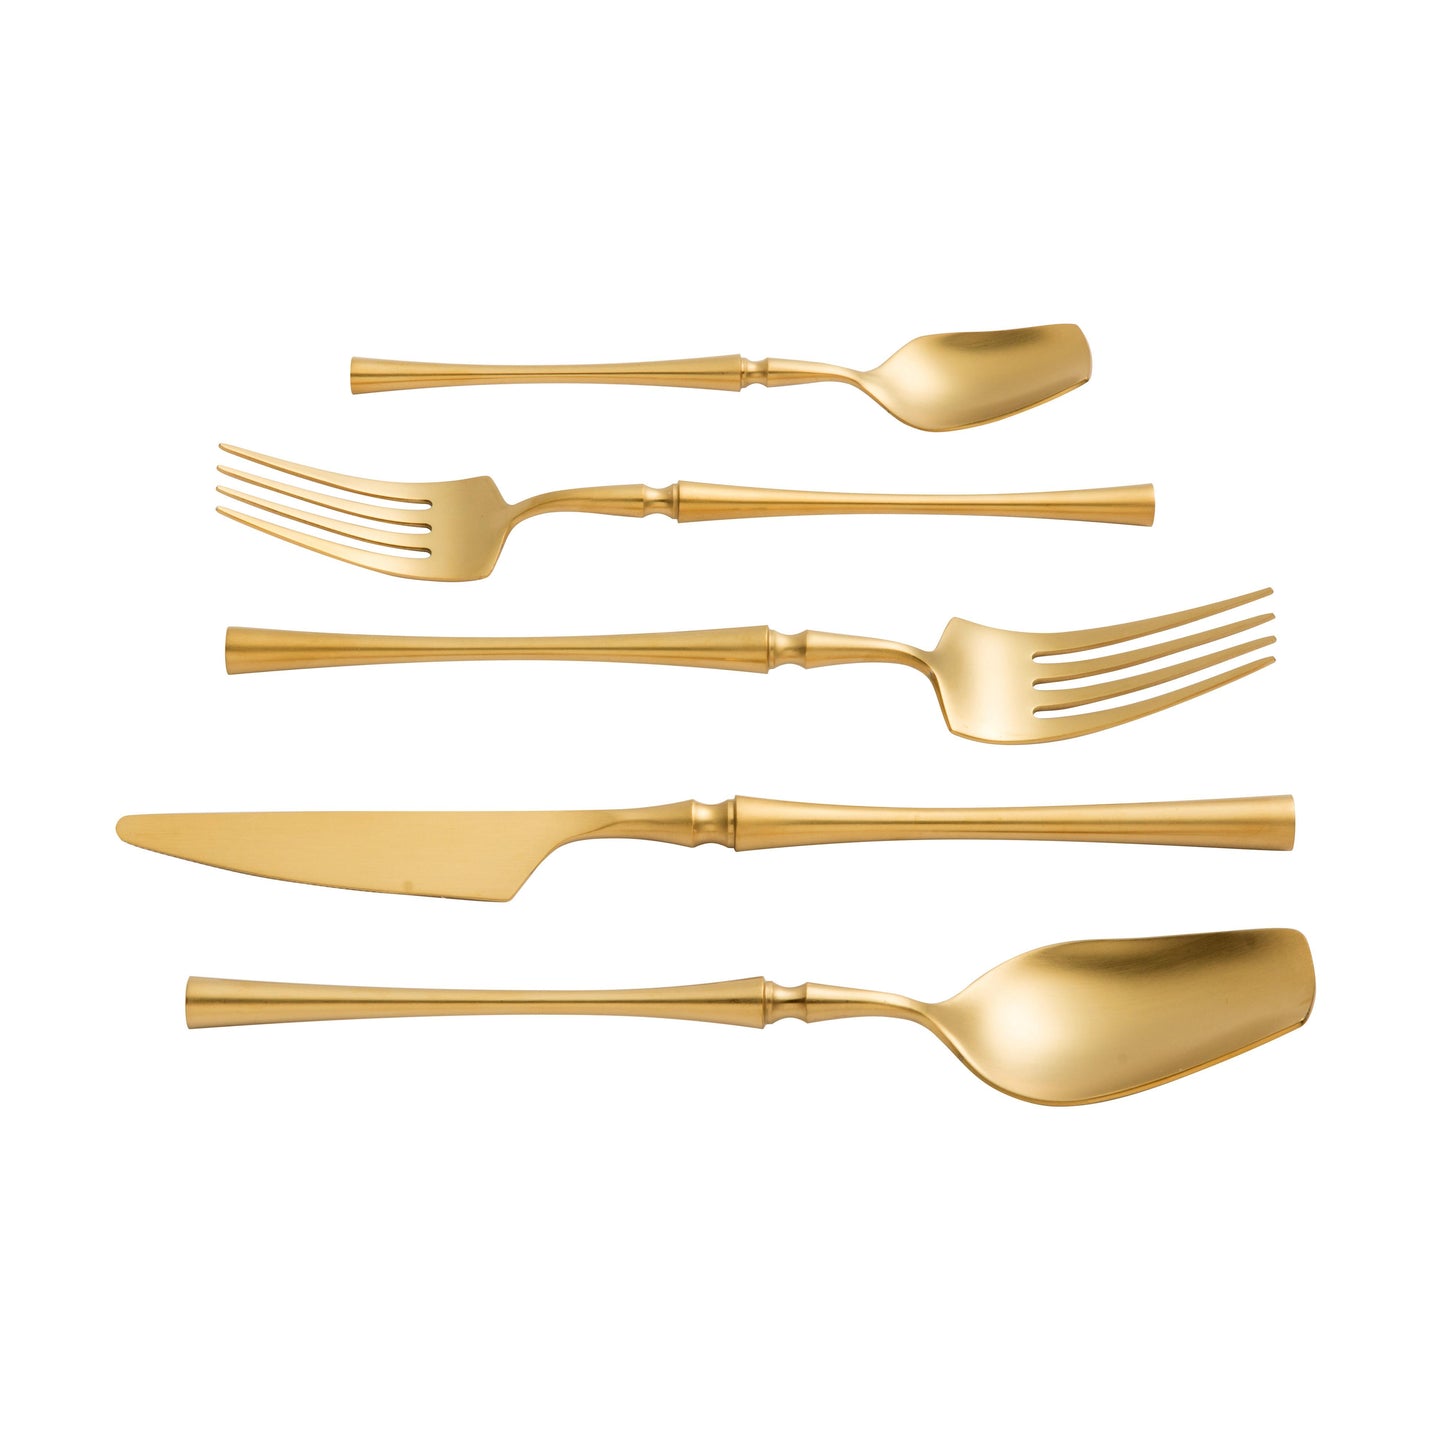 ladder brushed gold stainless steel flatware - set of 20 pieces